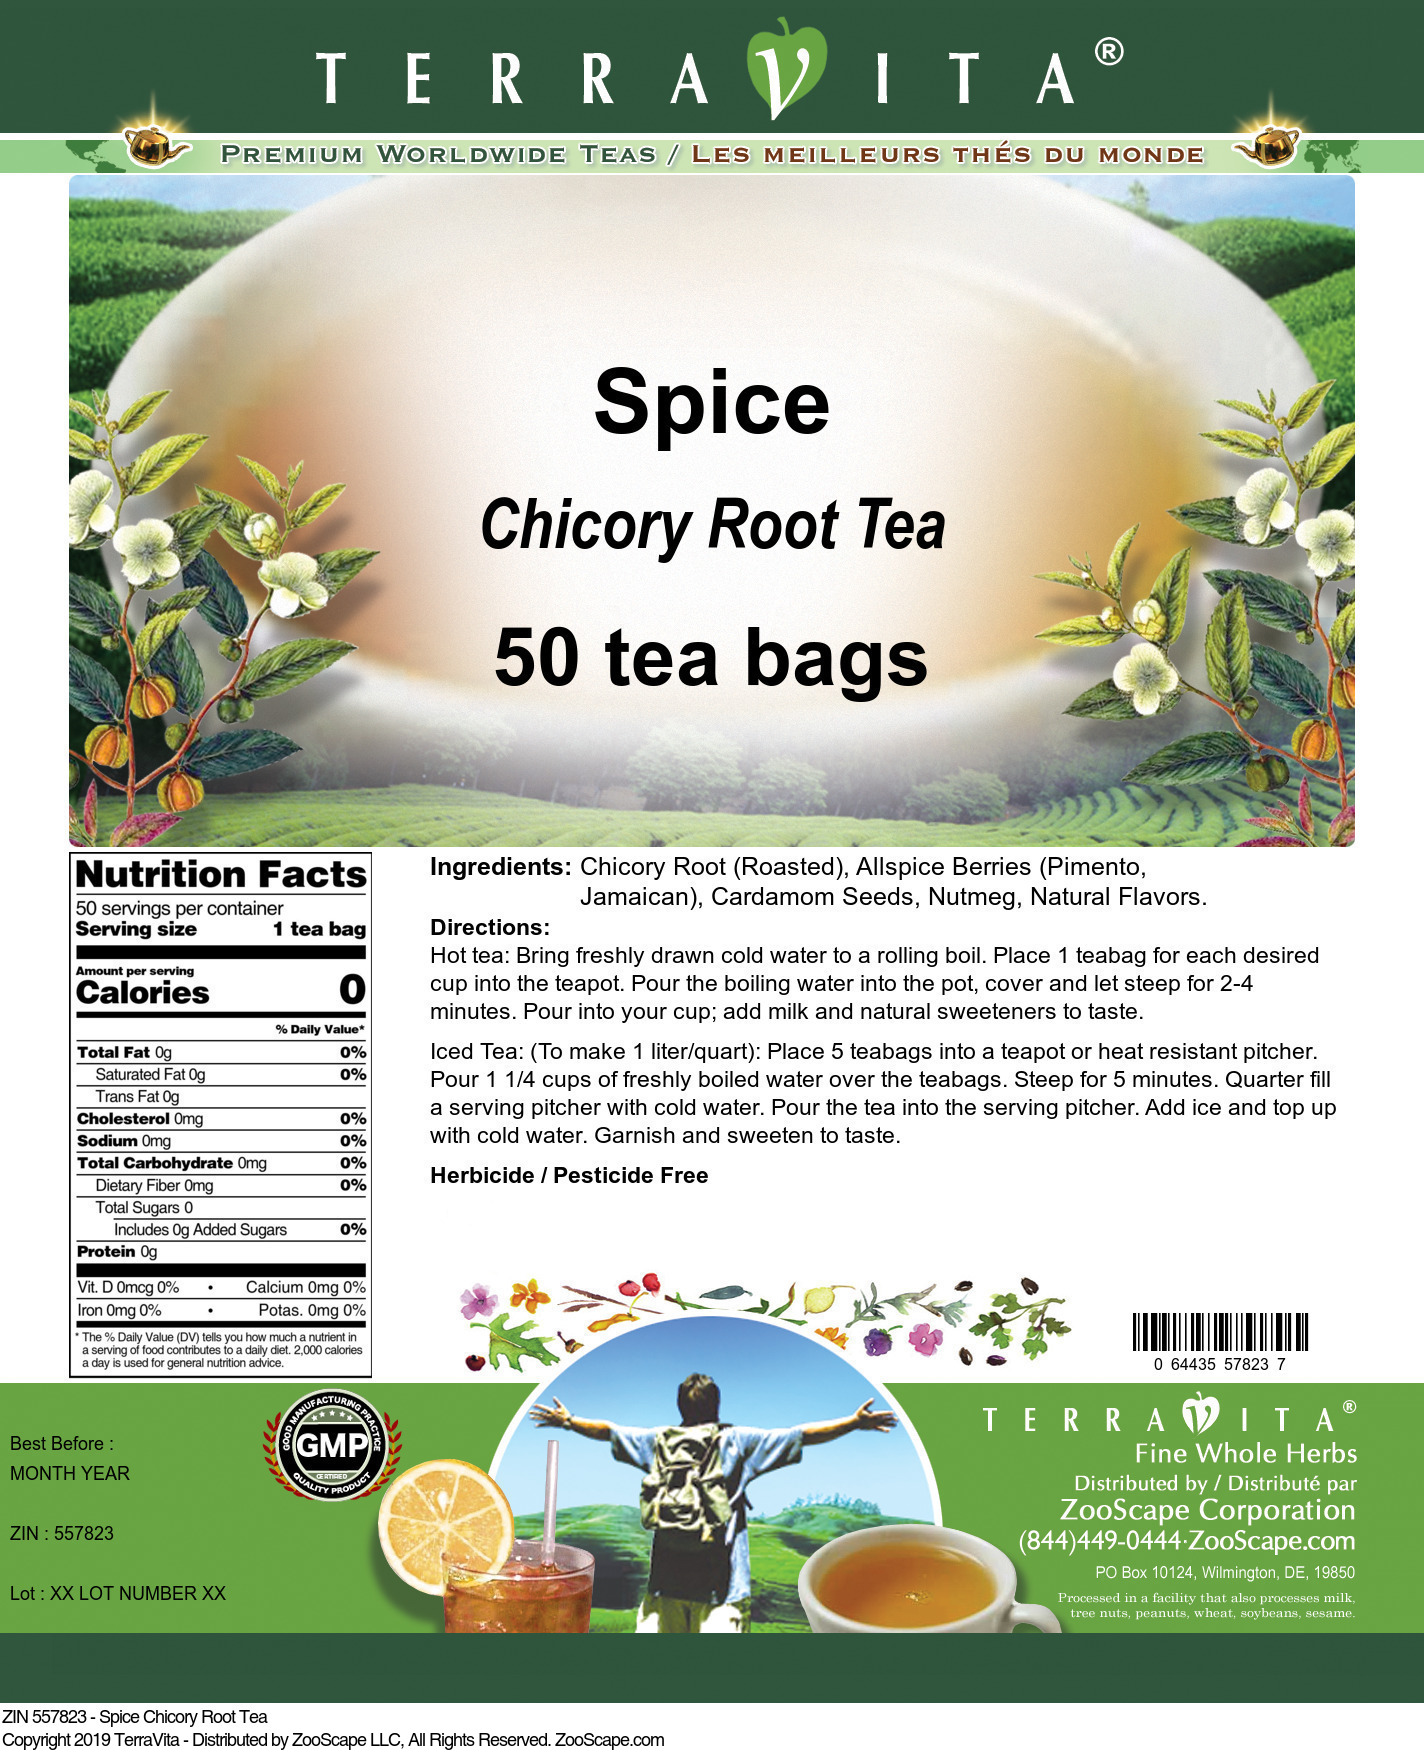 Spice Chicory Root Tea - Label